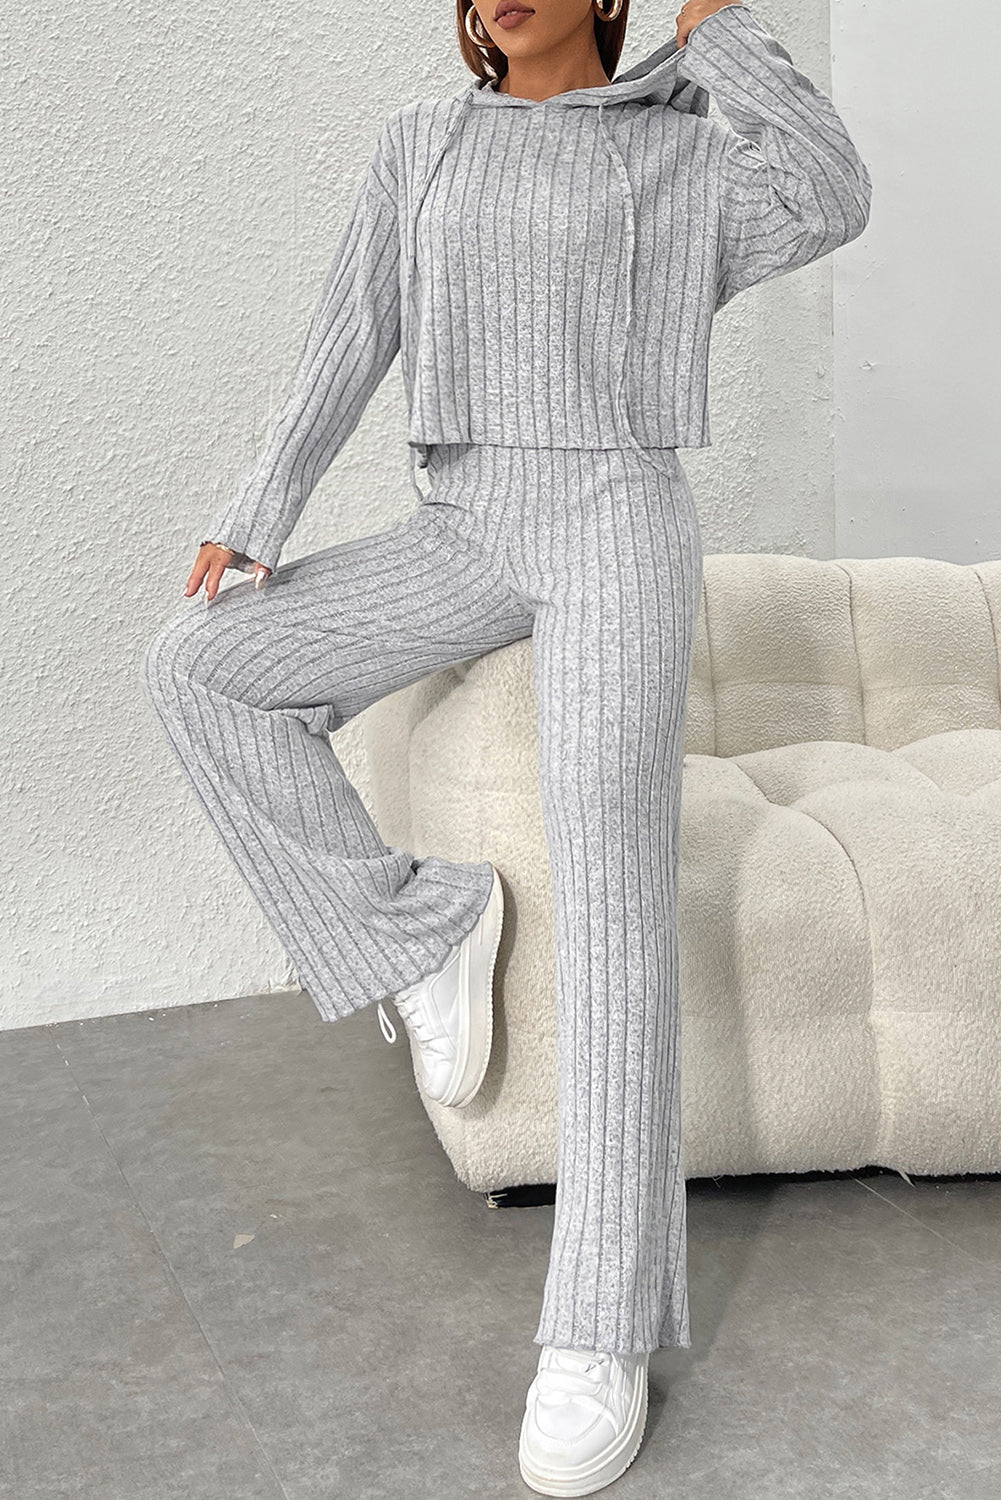 Plain Ribbed Loose Fit Two-Piece Lounge Set - Nicole Lee Apparel